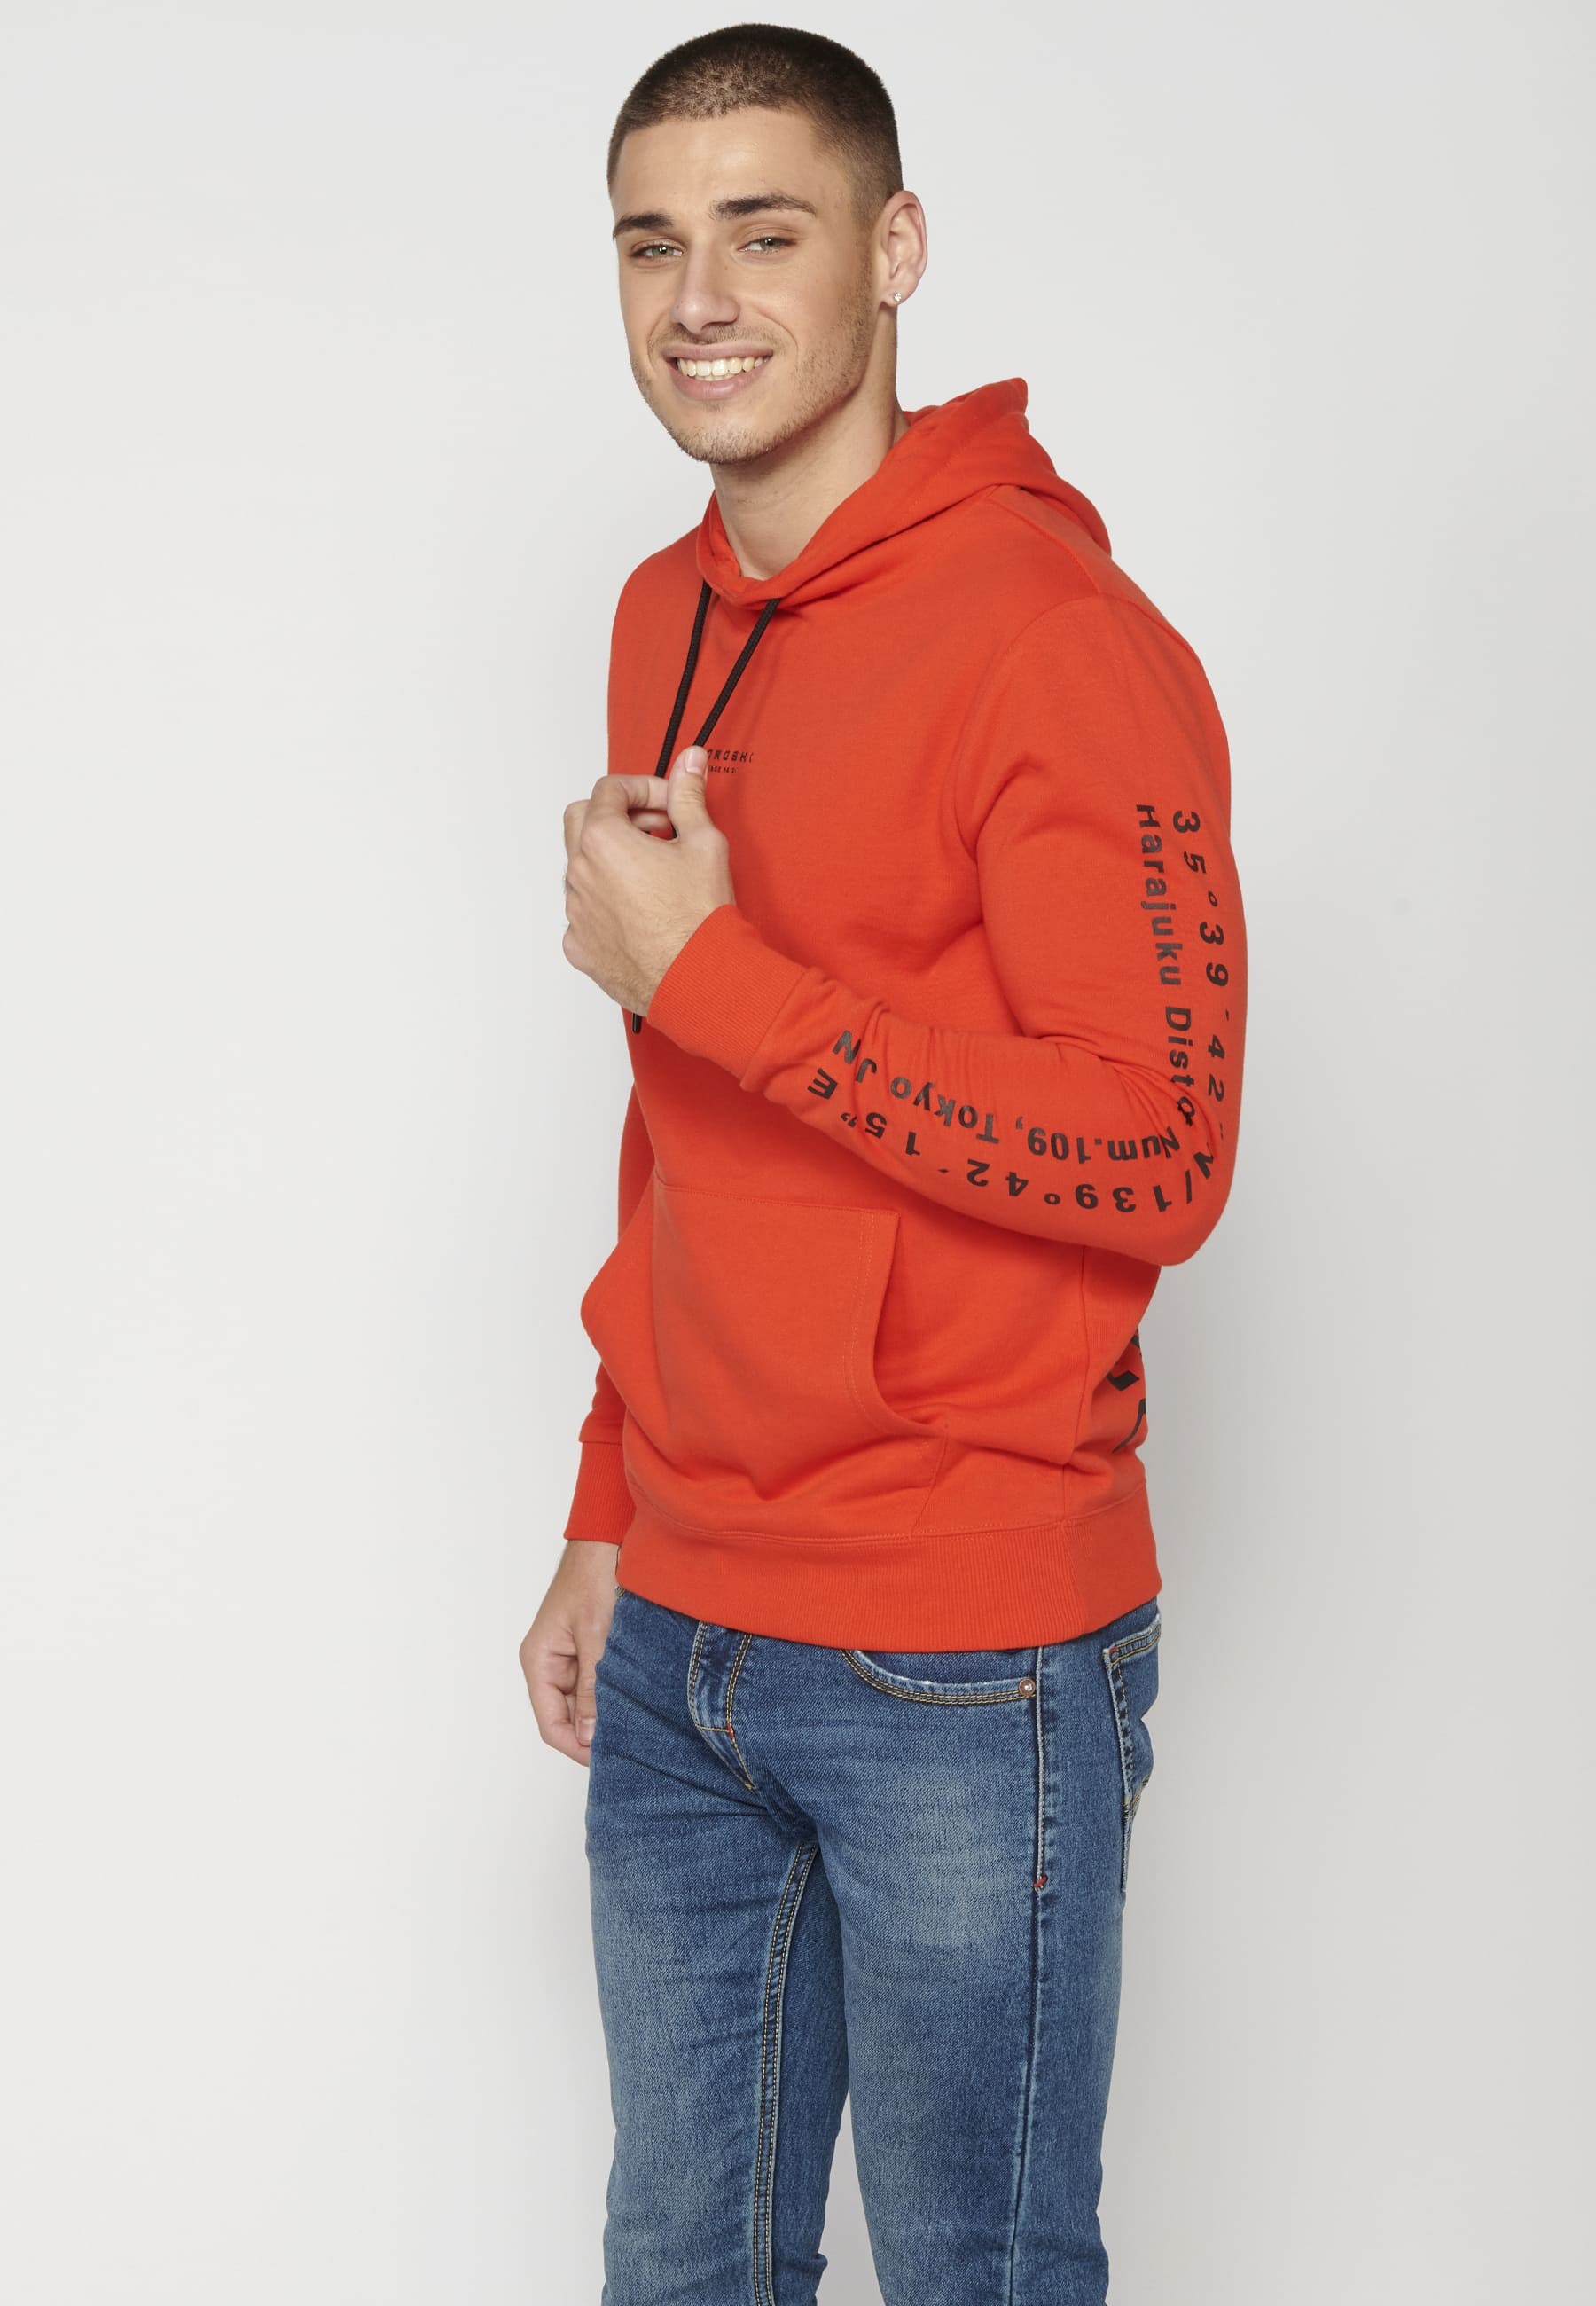 Hooded Sweatshirt with Front Pocket for Men